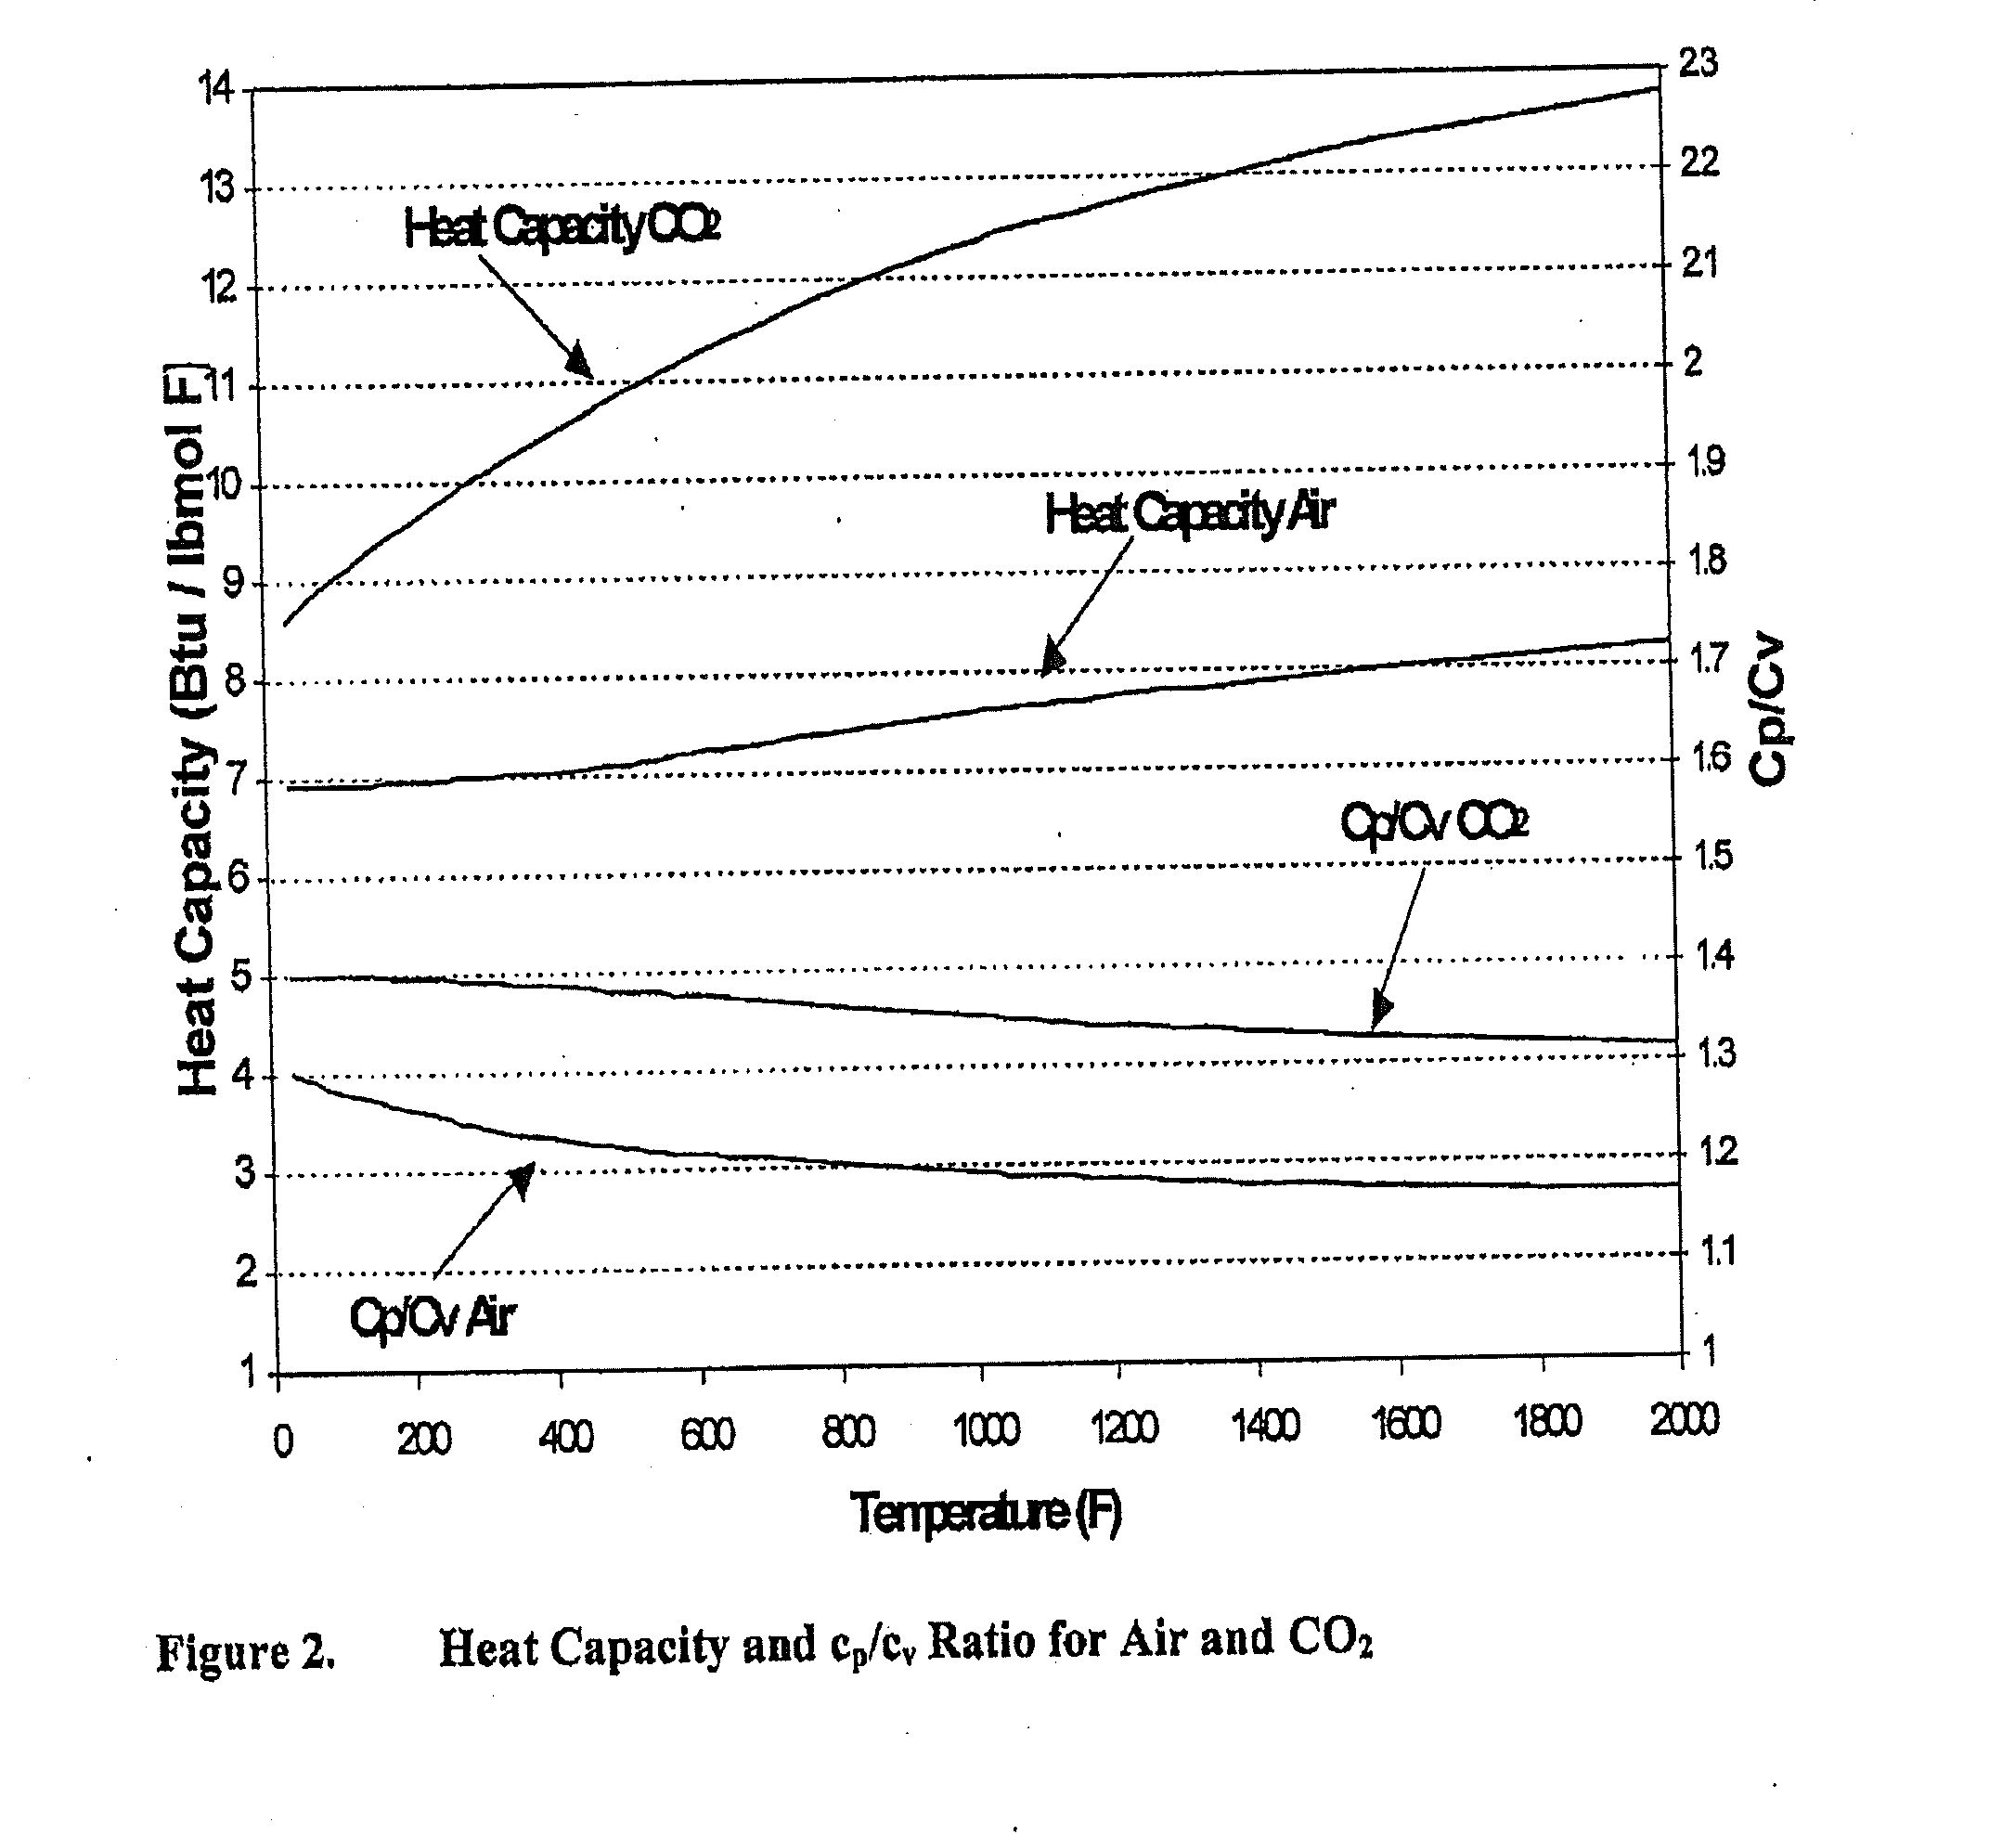 Solar power plant and method and/or system of storing energy in a concentrated solar power plant